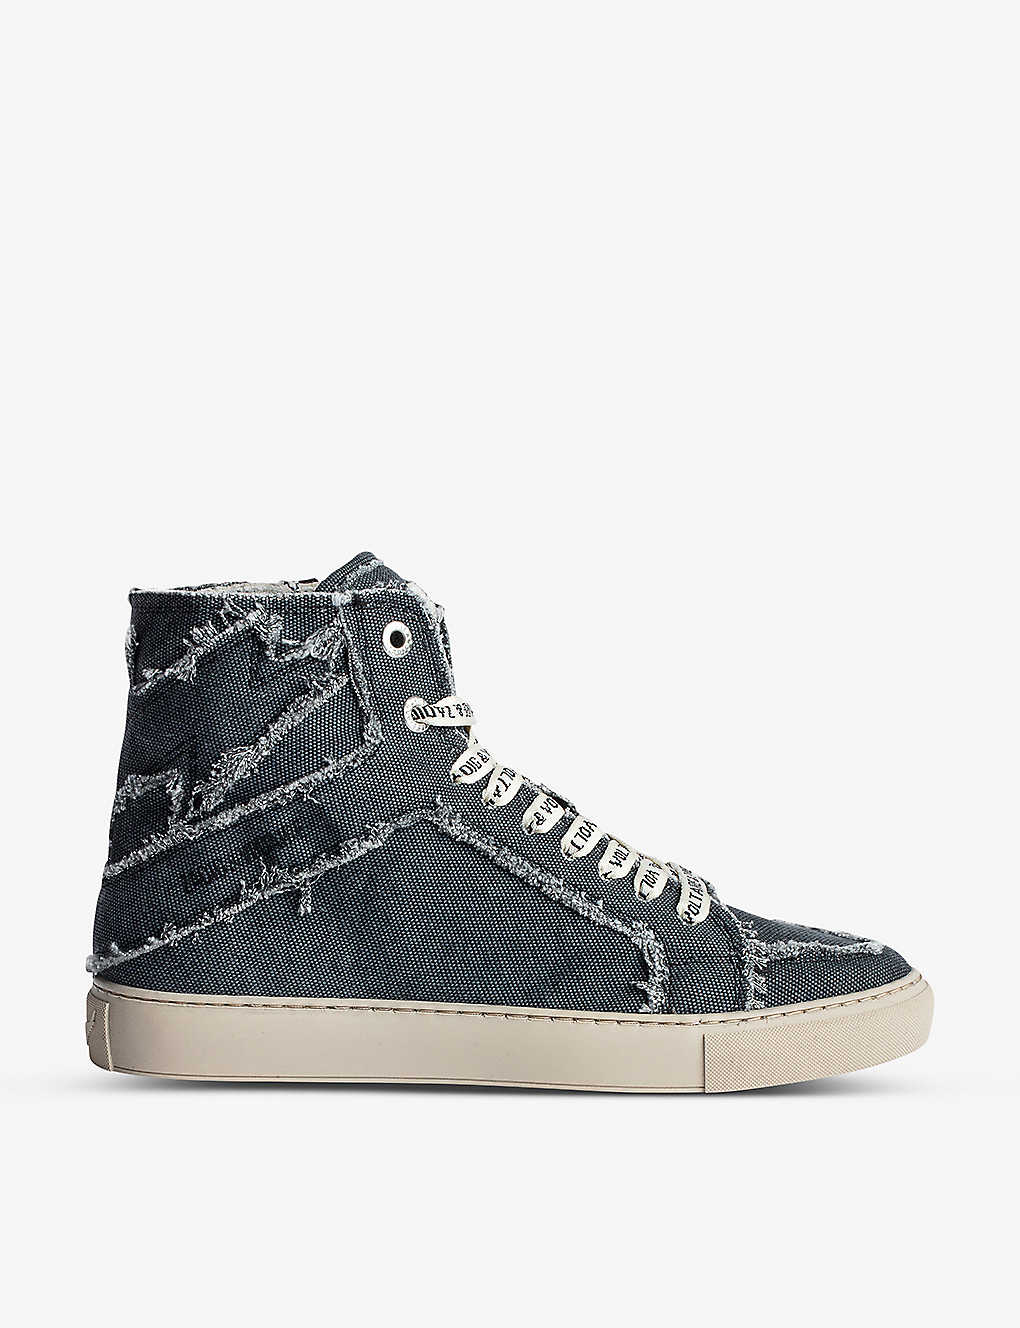 ZADIG & VOLTAIRE ZADIG&VOLTAIRE WOMENS NOIR FLASH ZV1747 RAW-EDGE CANVAS HIGH-TOP TRAINERS,65936147